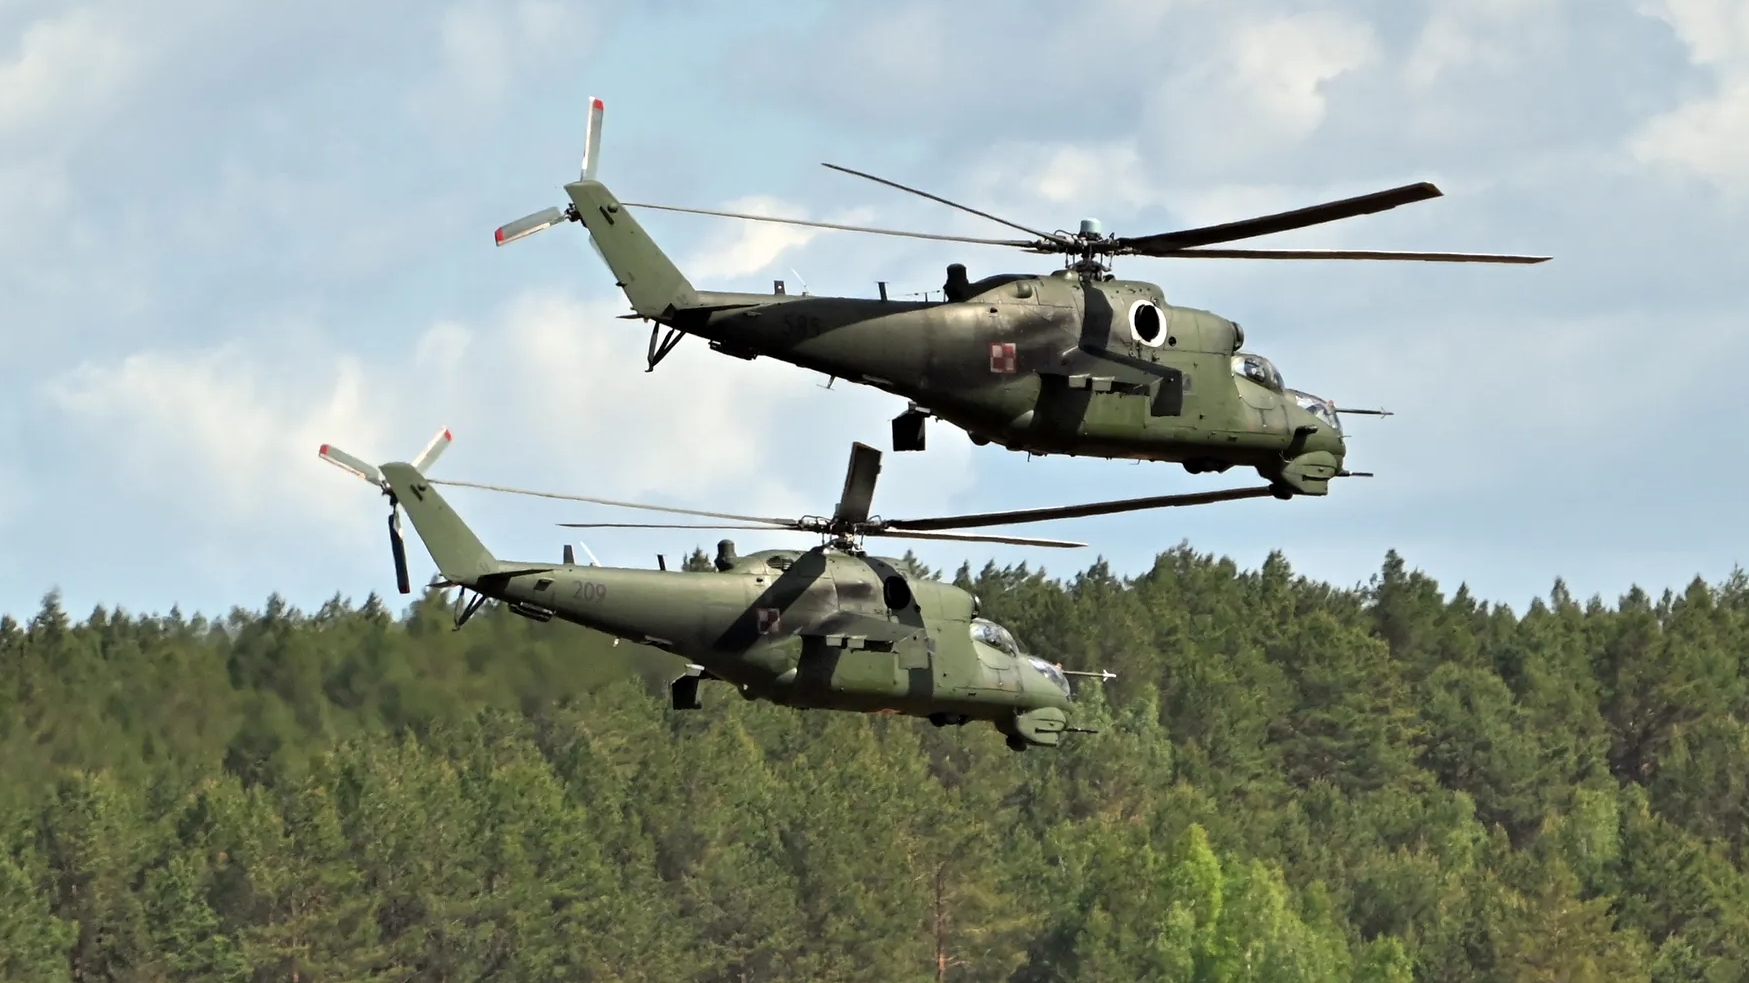 In Poland soldiers are looking for a rocket fuse. The helicopter lost it while patrolling the border with Belarus